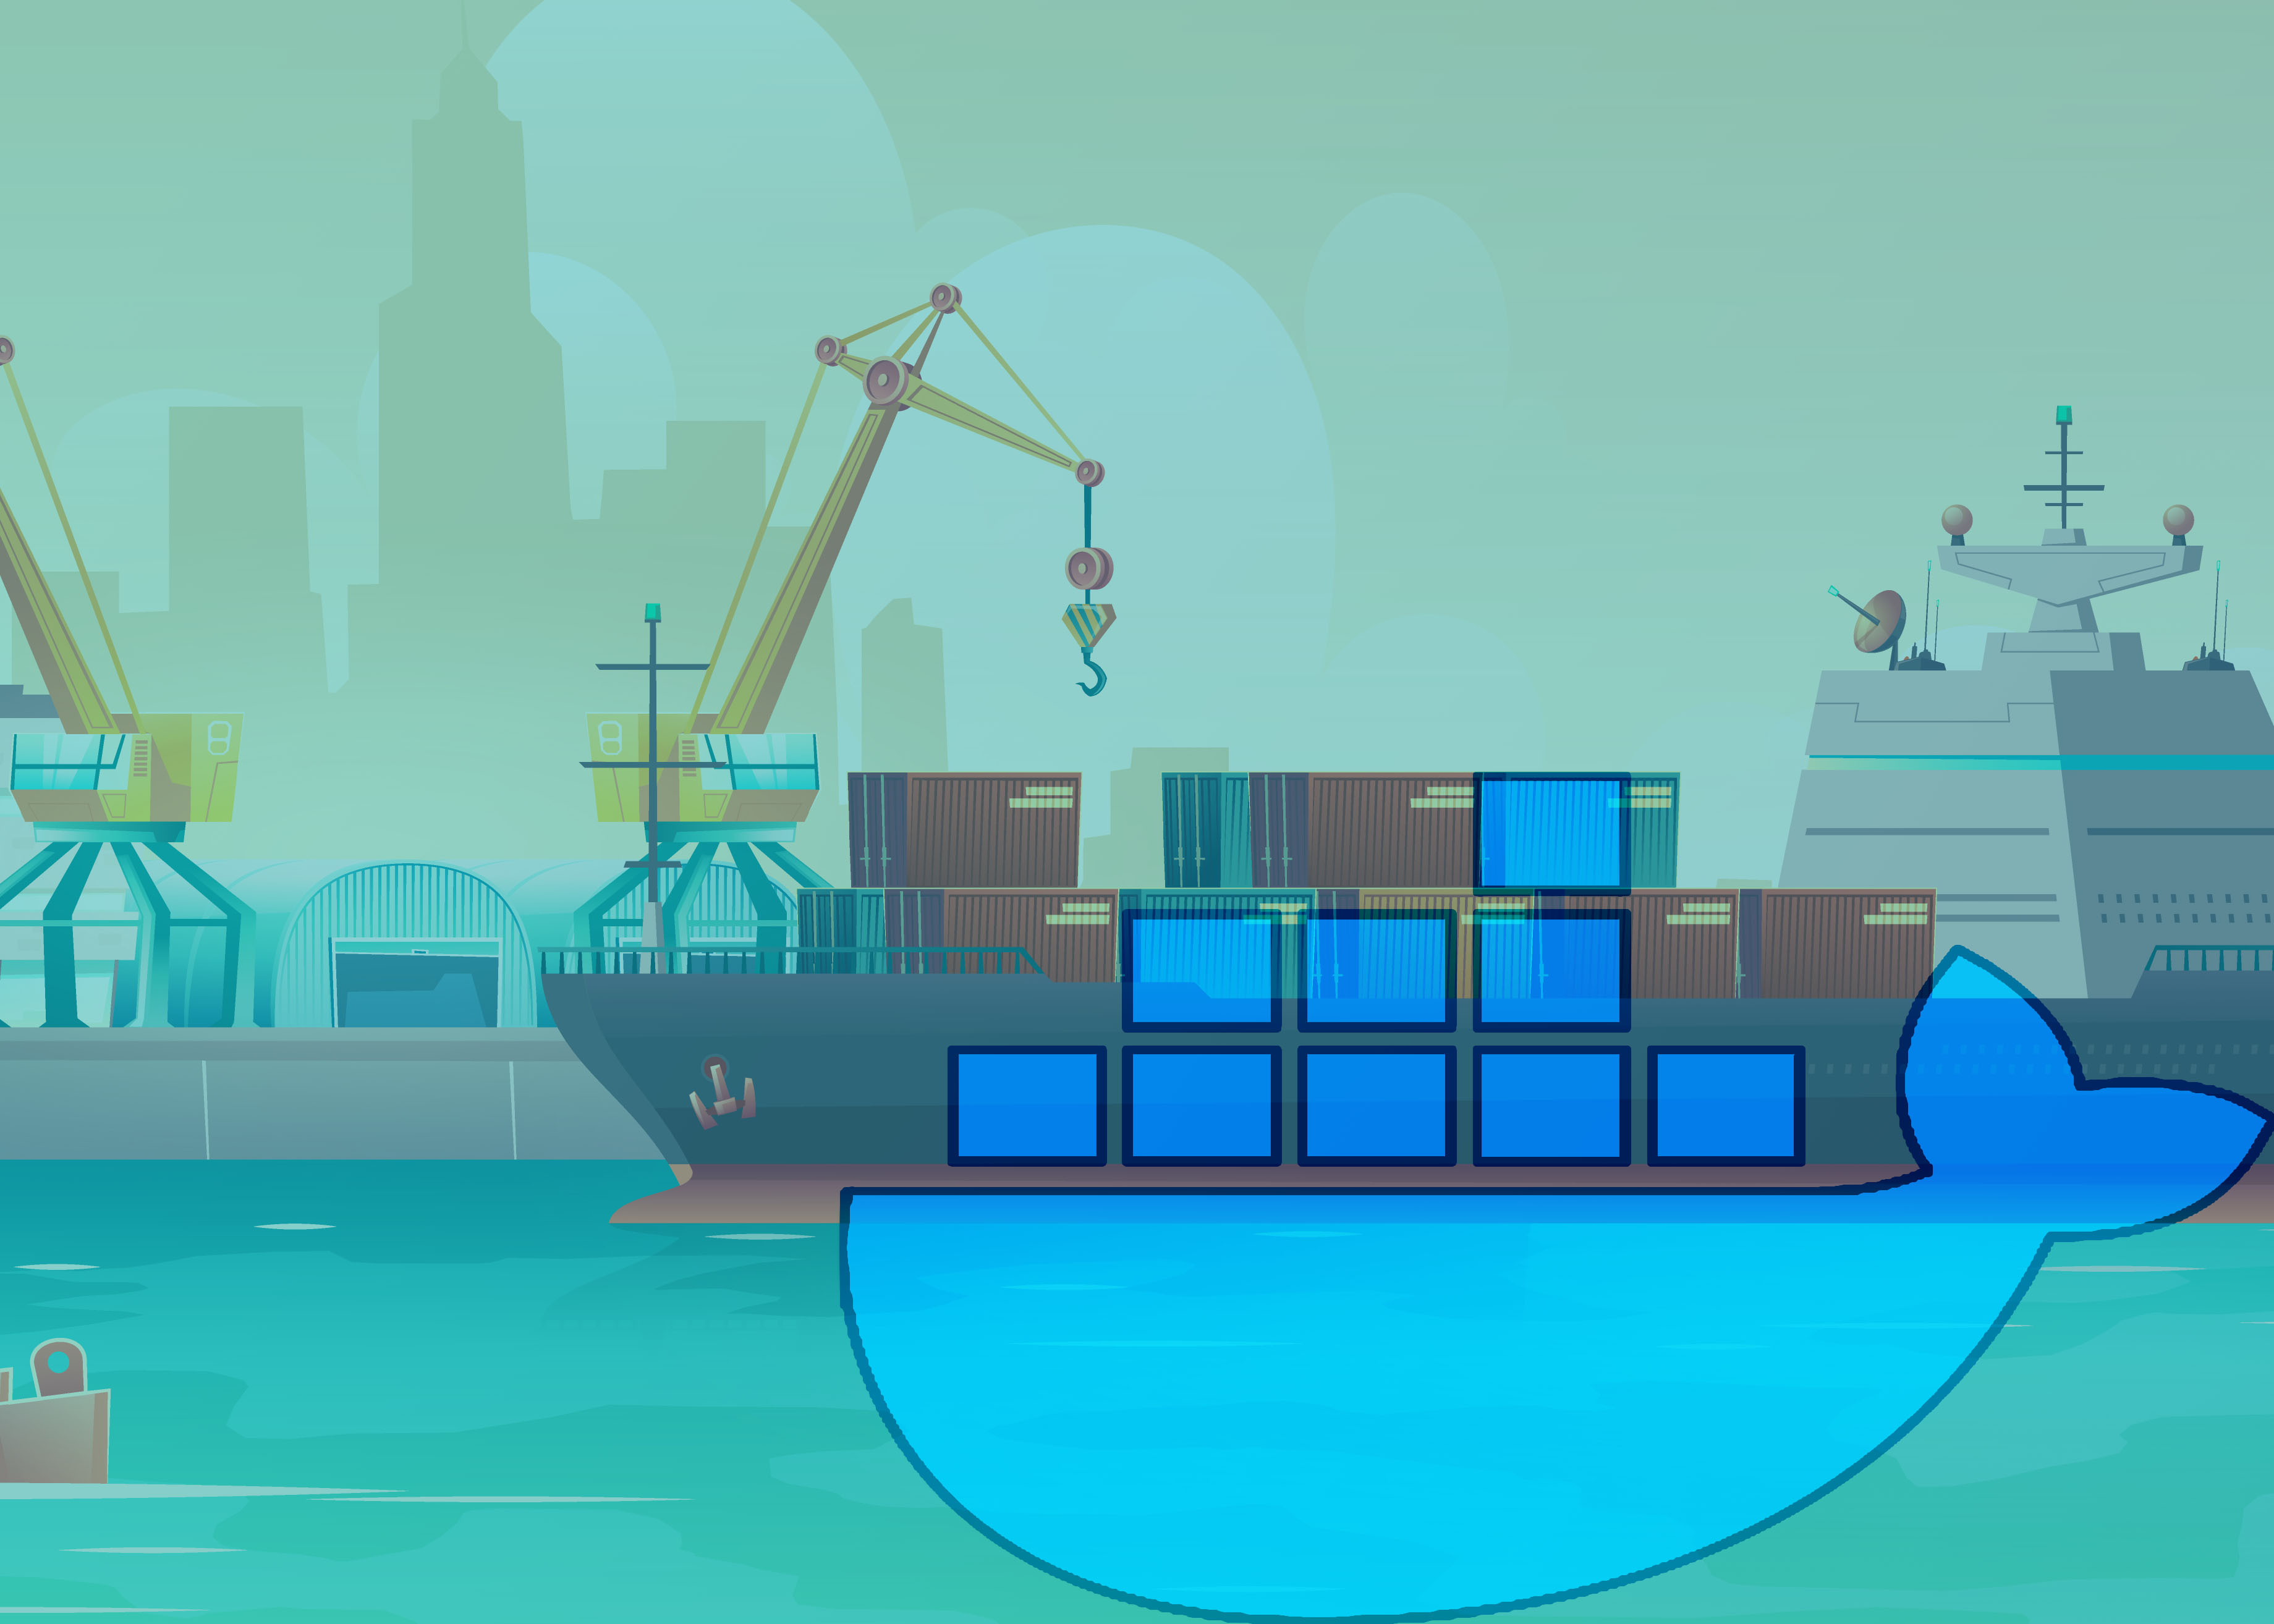 Little more about docker container images and containers